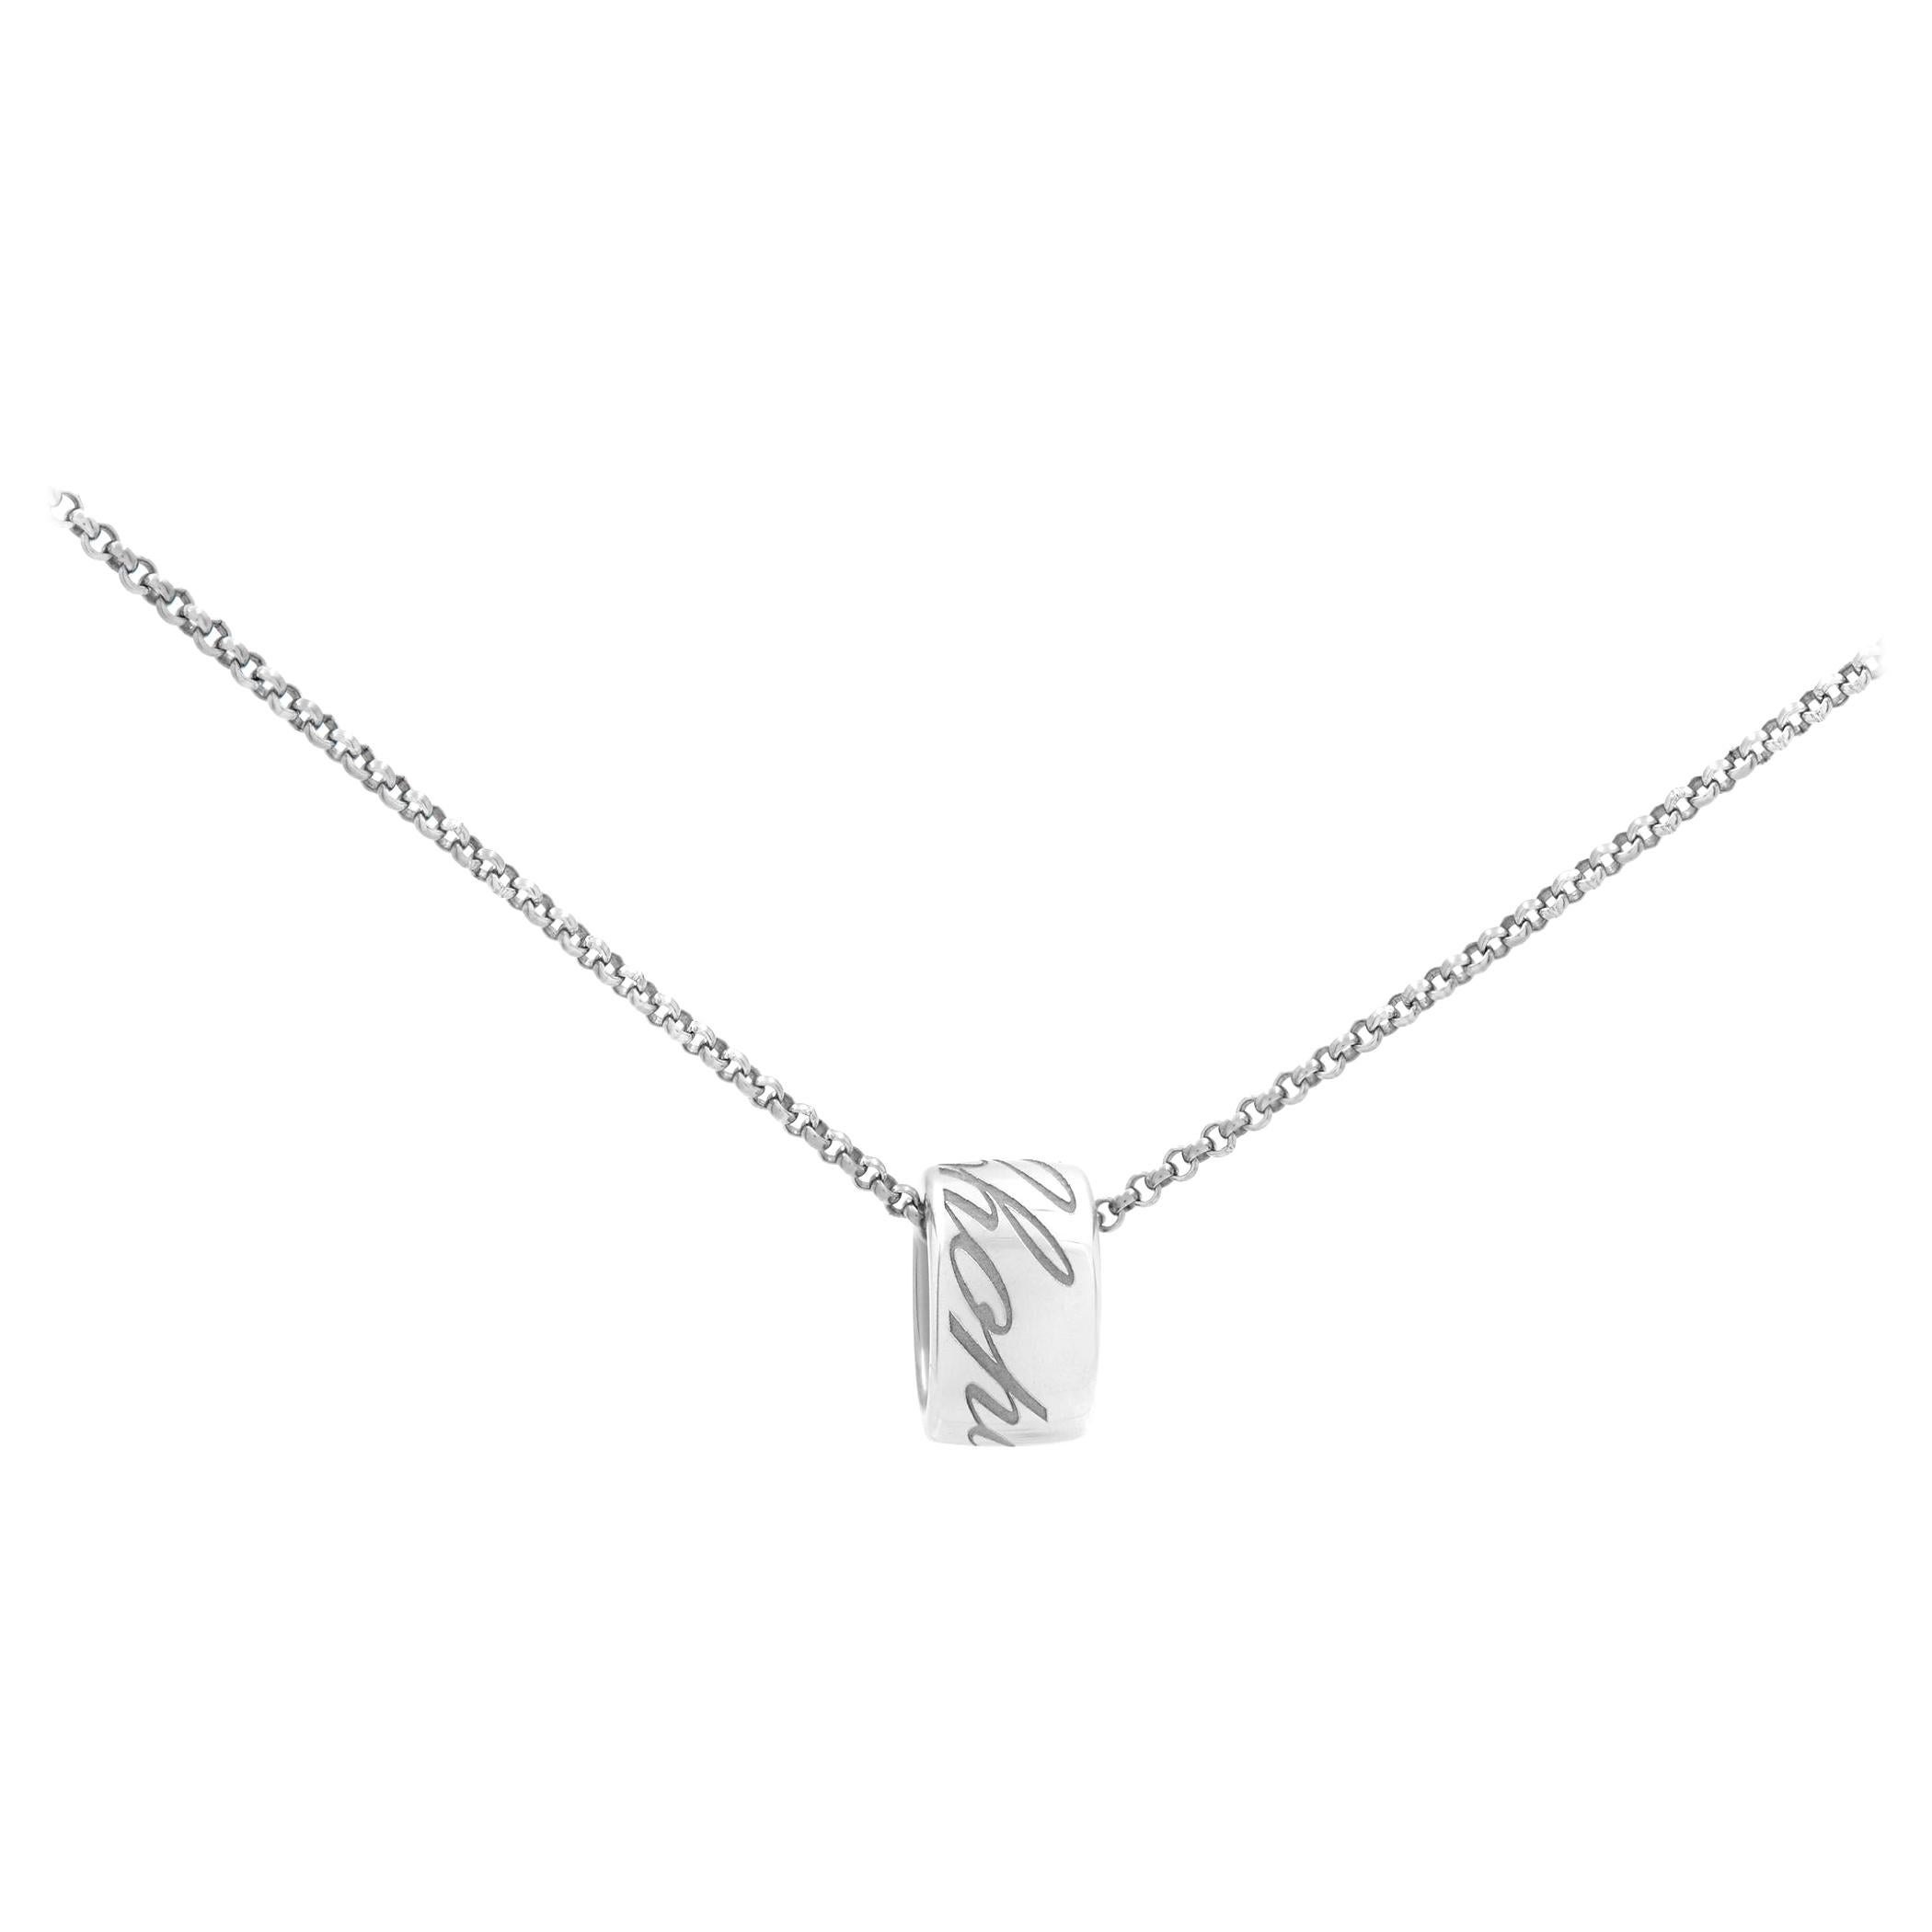 Chopard 18K White Gold Chopardissimo Pendant Necklace For Sale